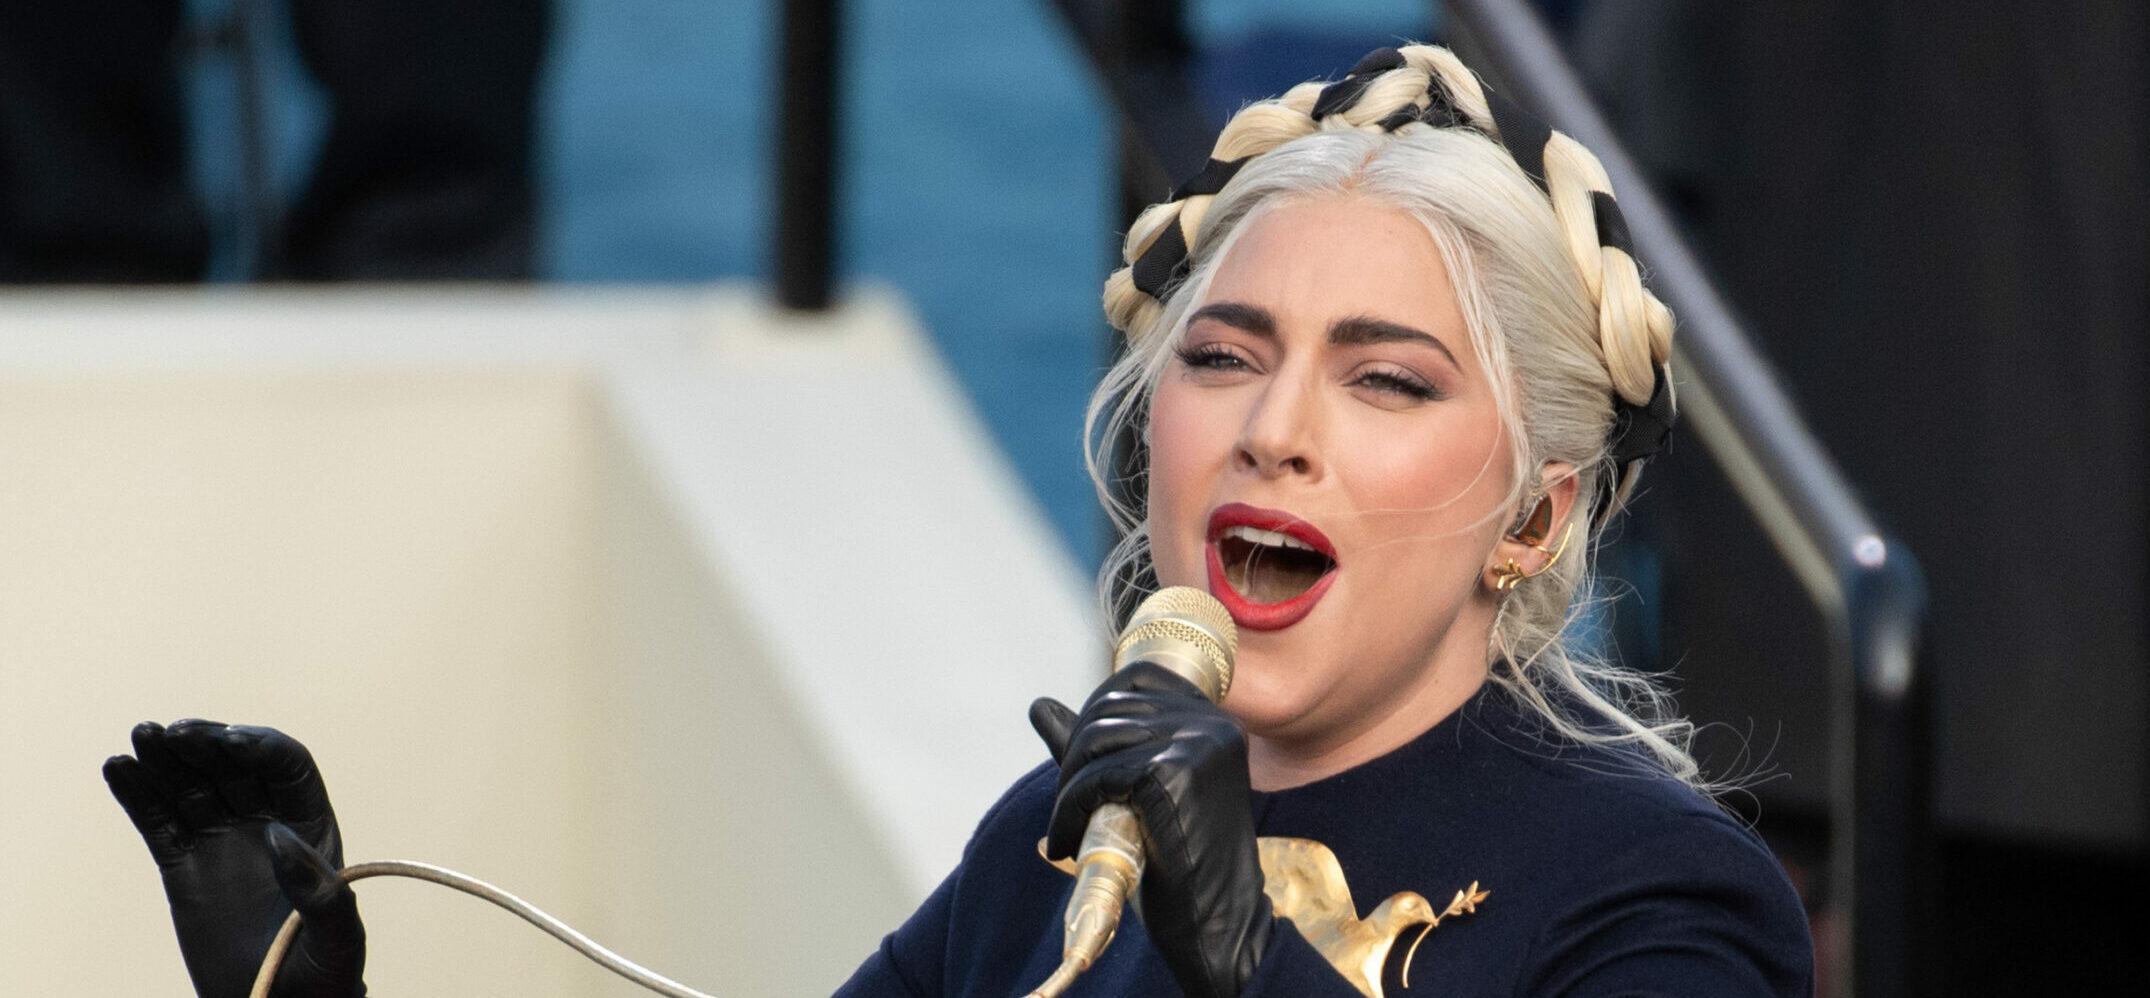 Celebrate Lady Gaga’s 36th Birthday With All Of Her Hit Songs!